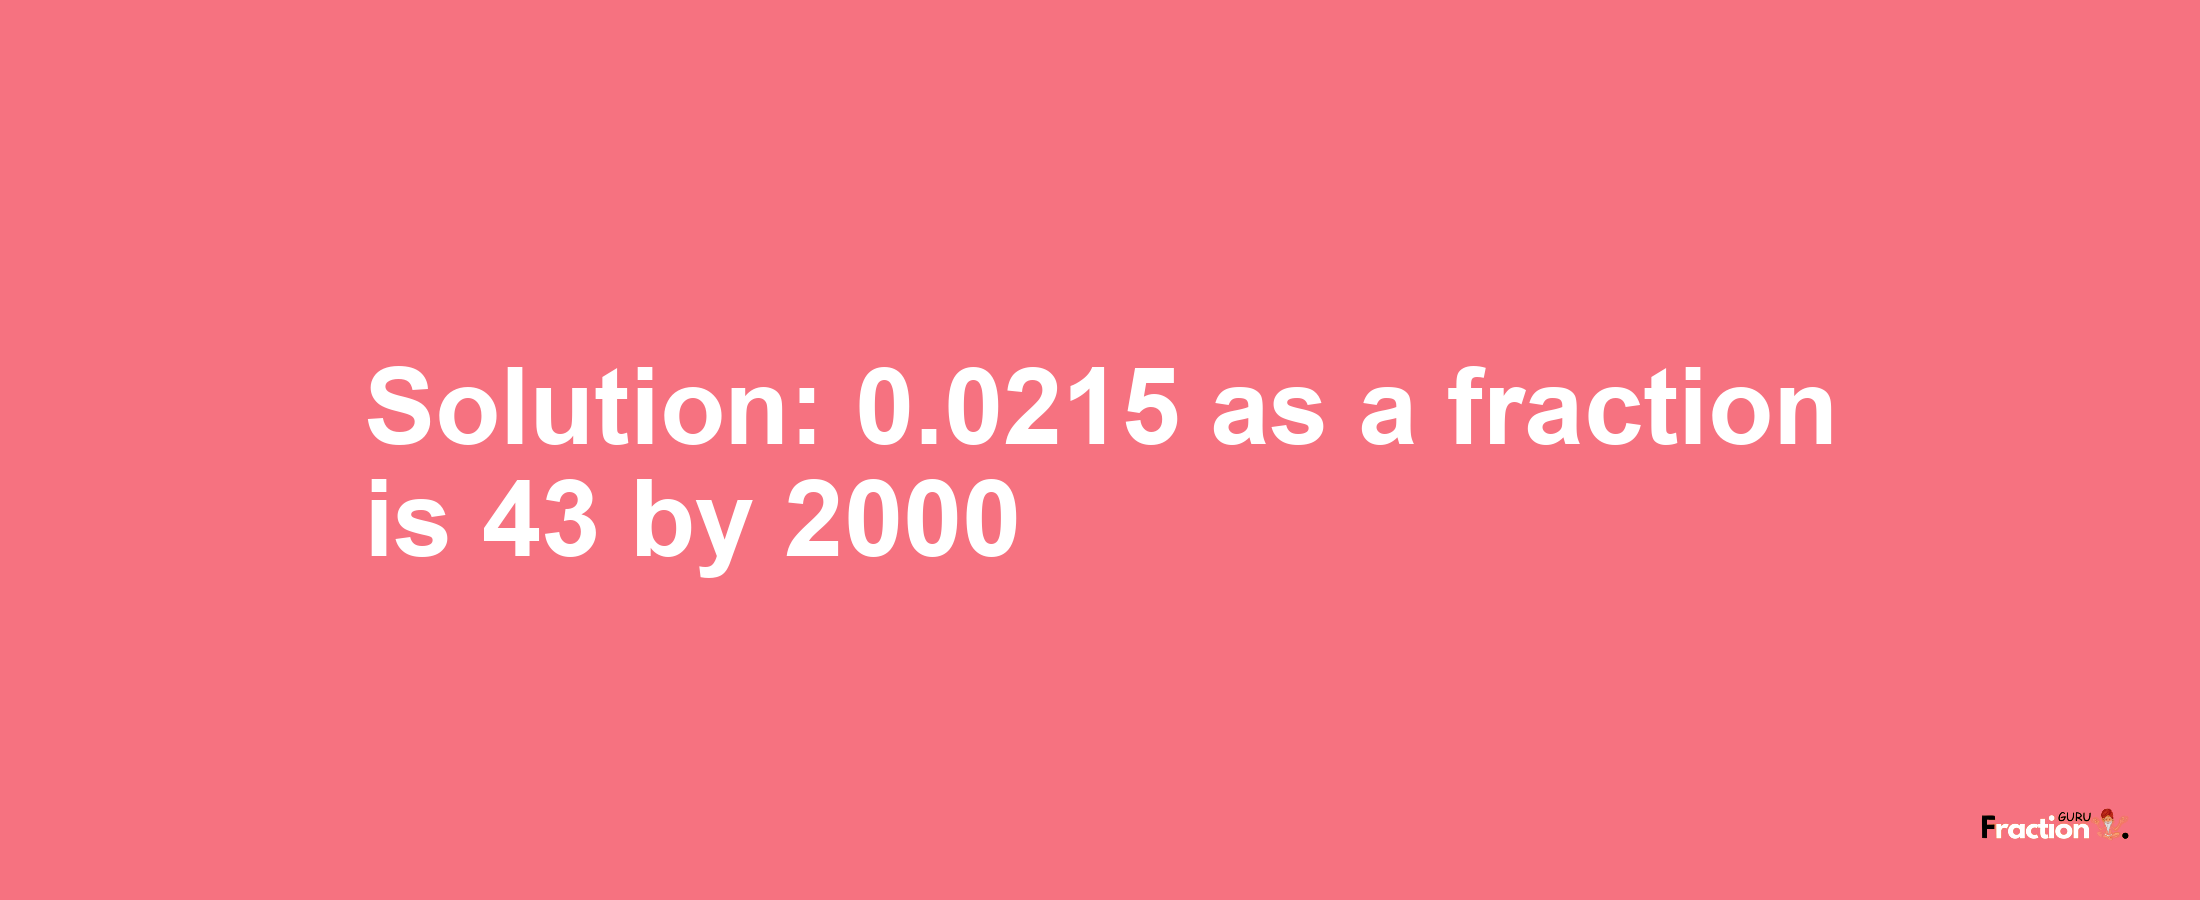 Solution:0.0215 as a fraction is 43/2000